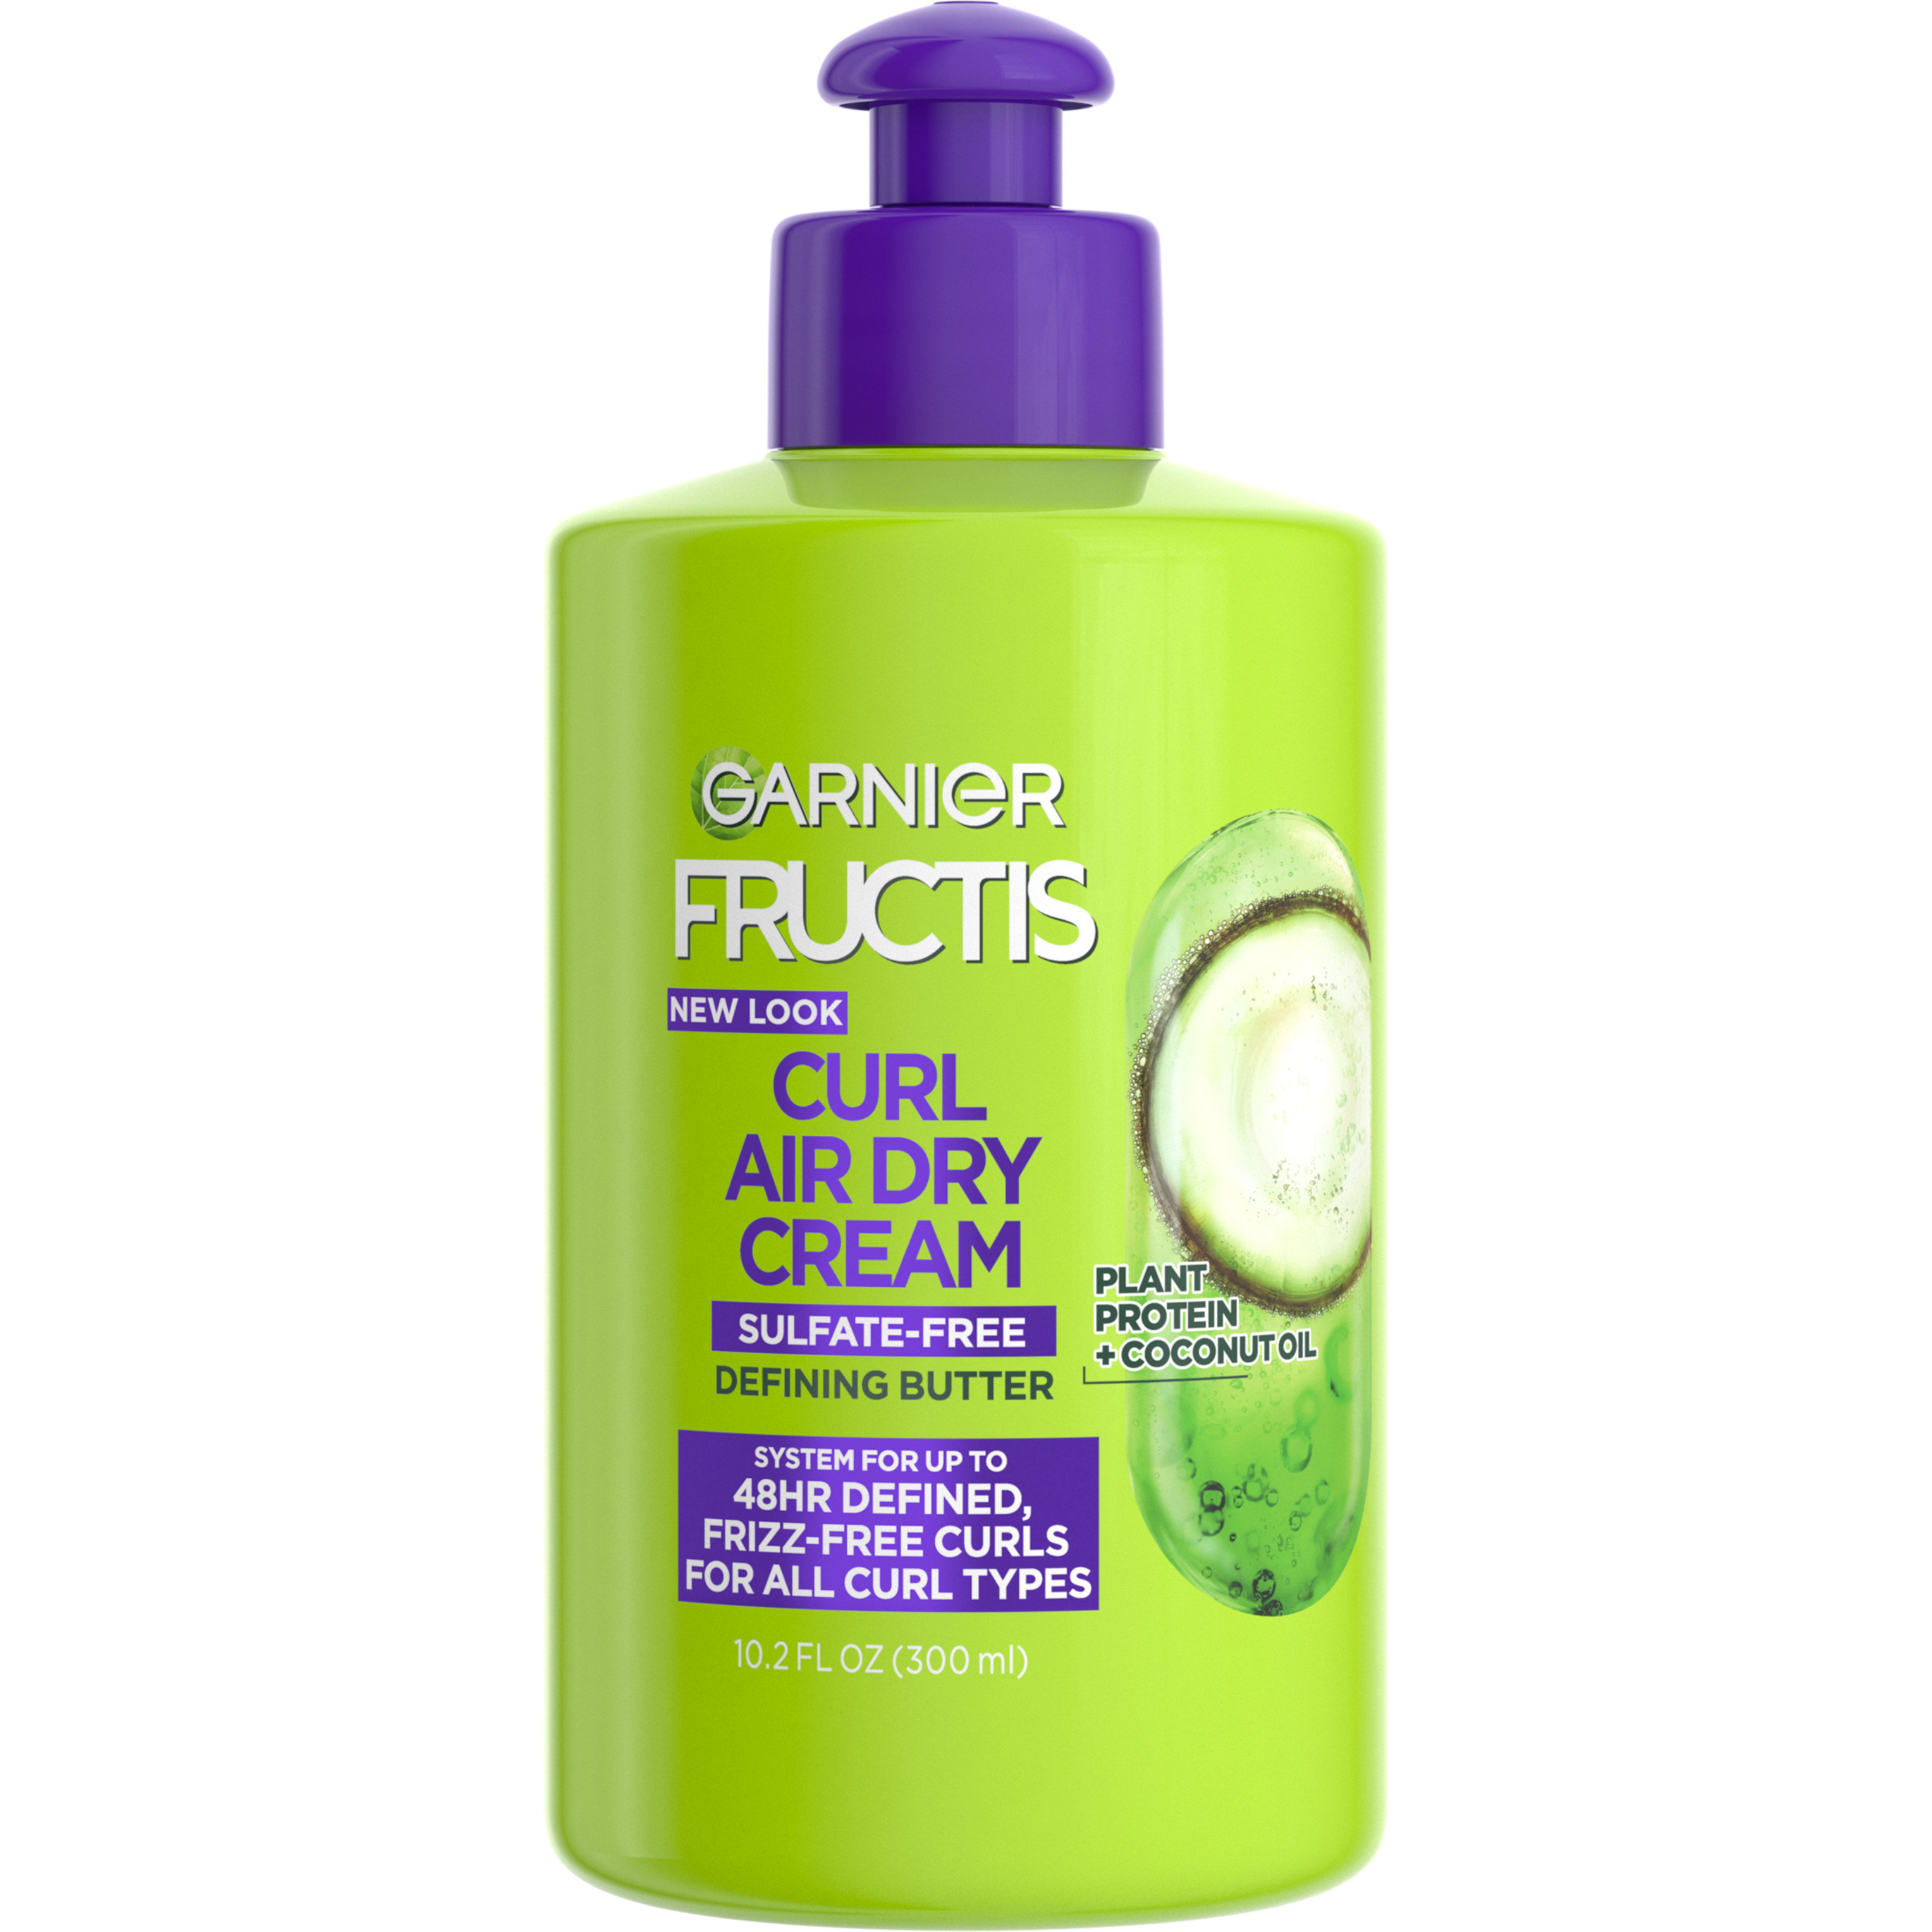 Garnier Fructis Curl Nourish Leave in Treatment with Glycerin Coconut Oil, 10.2 fl oz - image 1 of 8